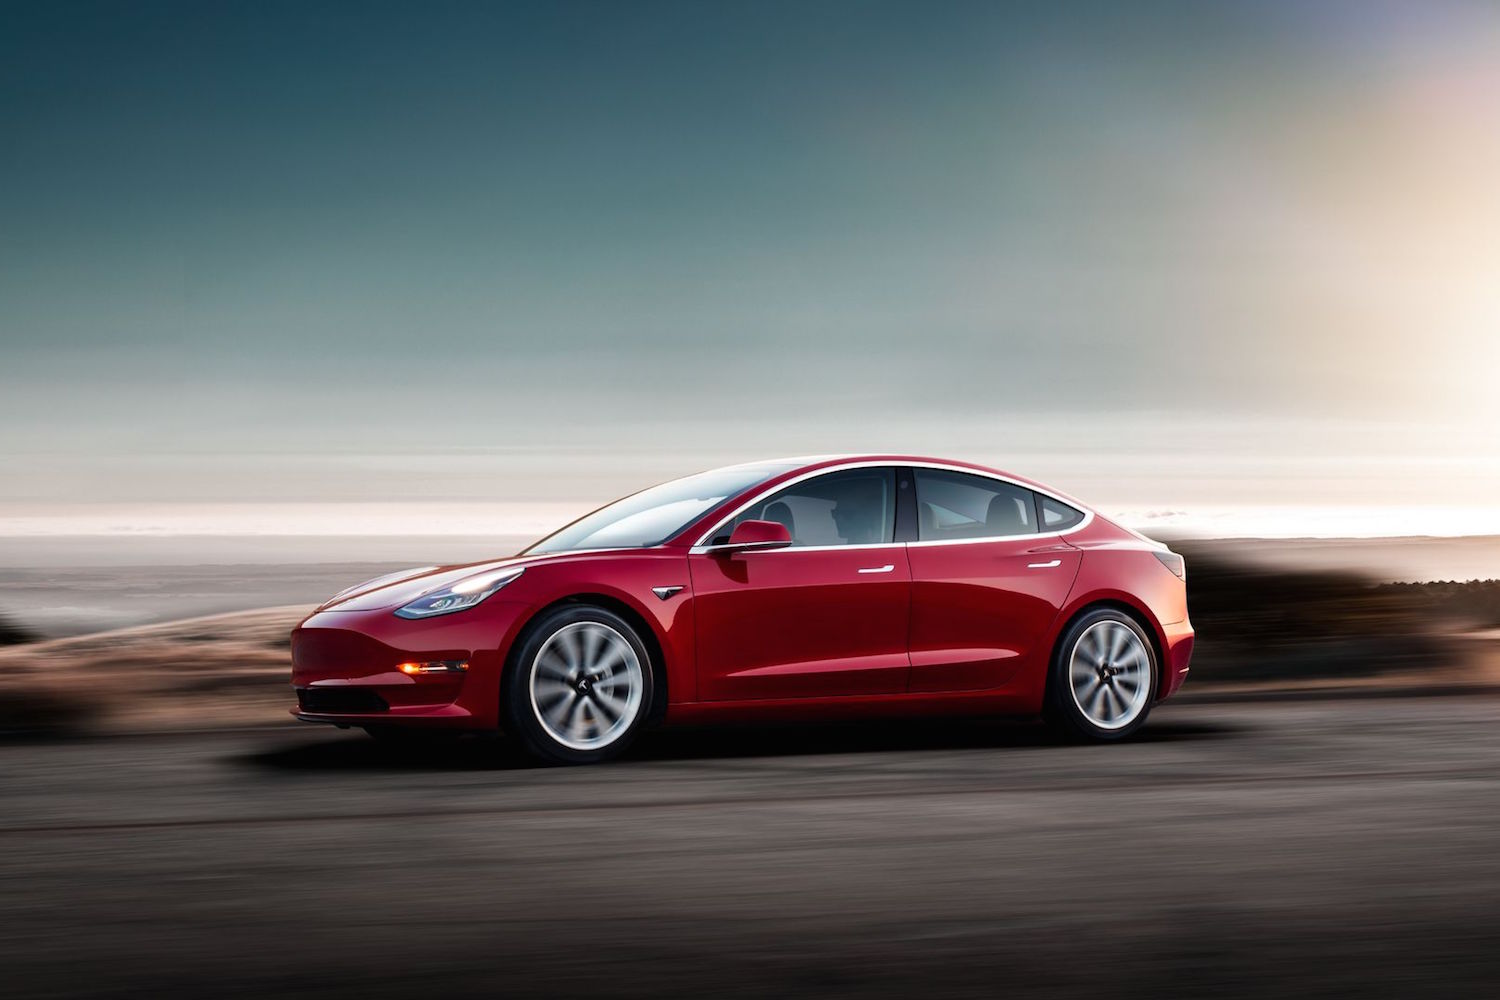 Tesla Model 3 Is World's Most-searched-for Electric Car, Survey Says